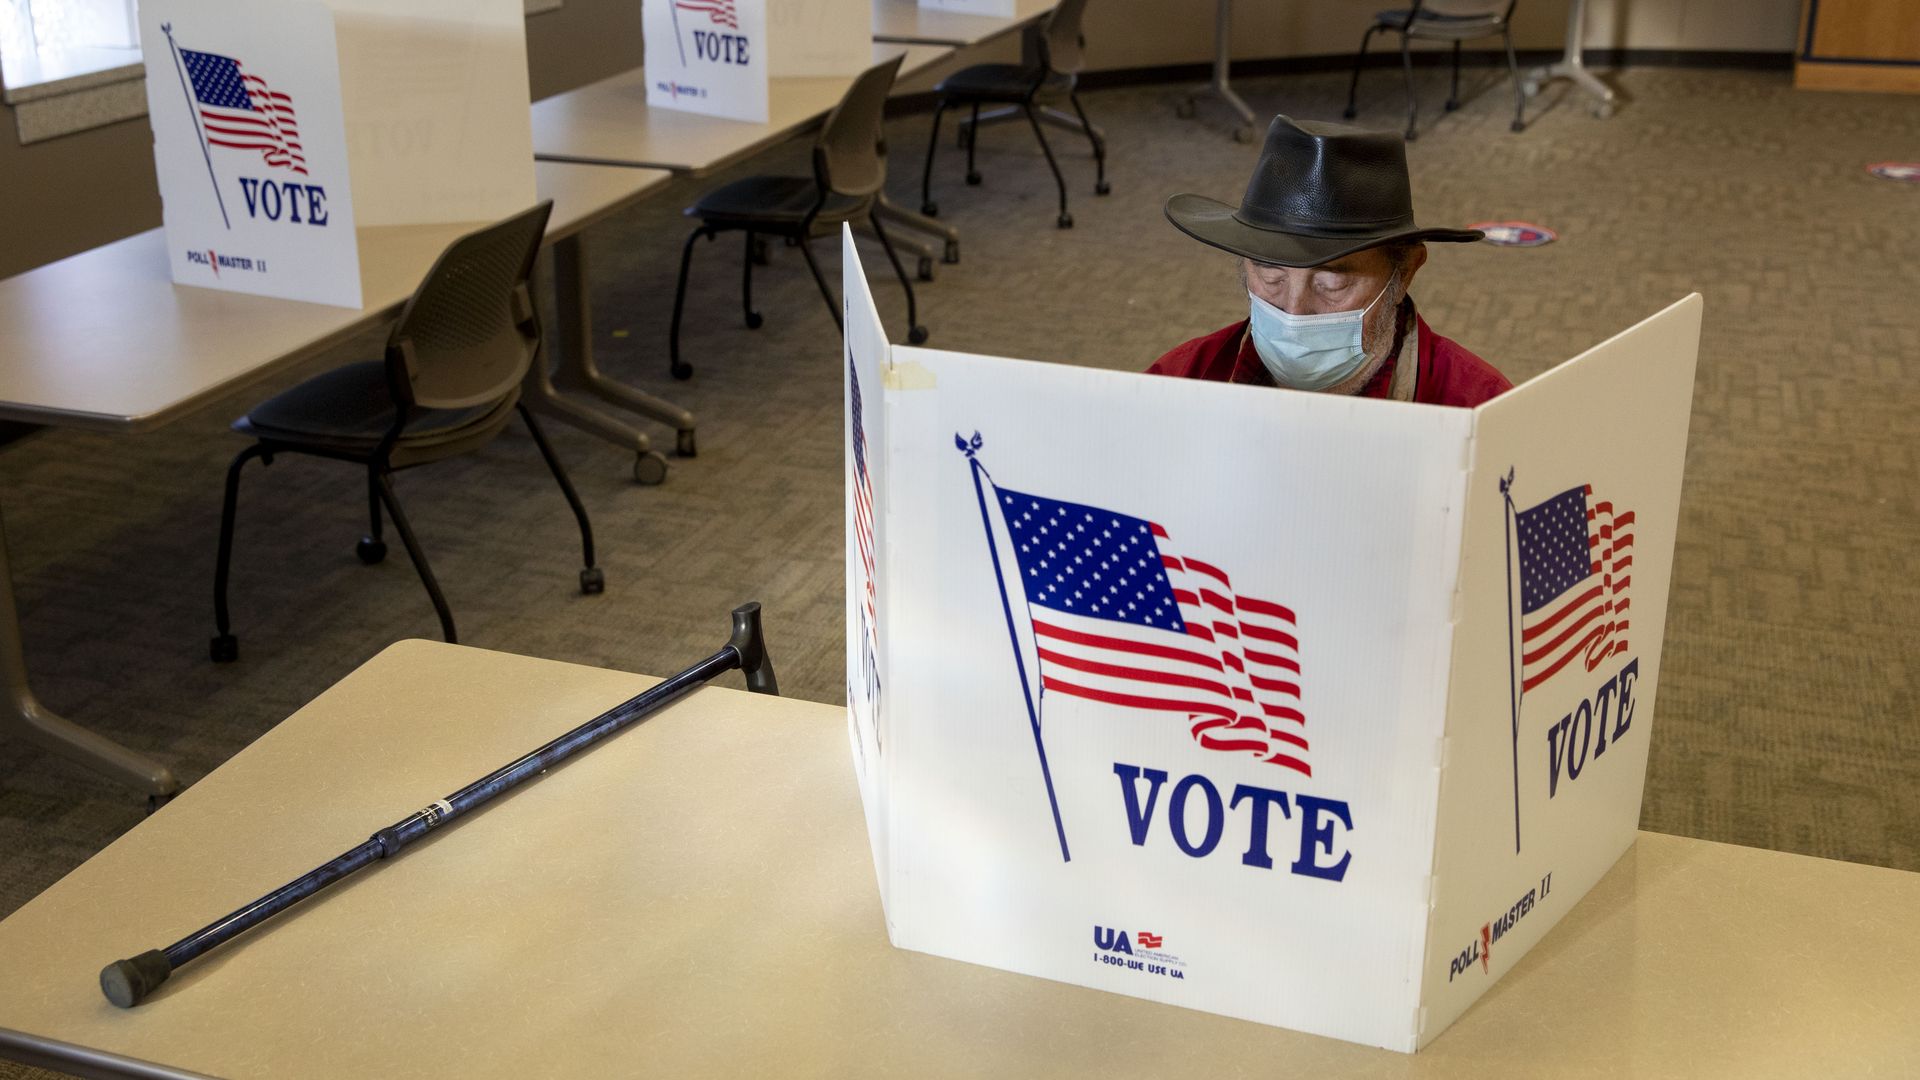 A person voting in Davenport, Iowa, on Oct. 5.